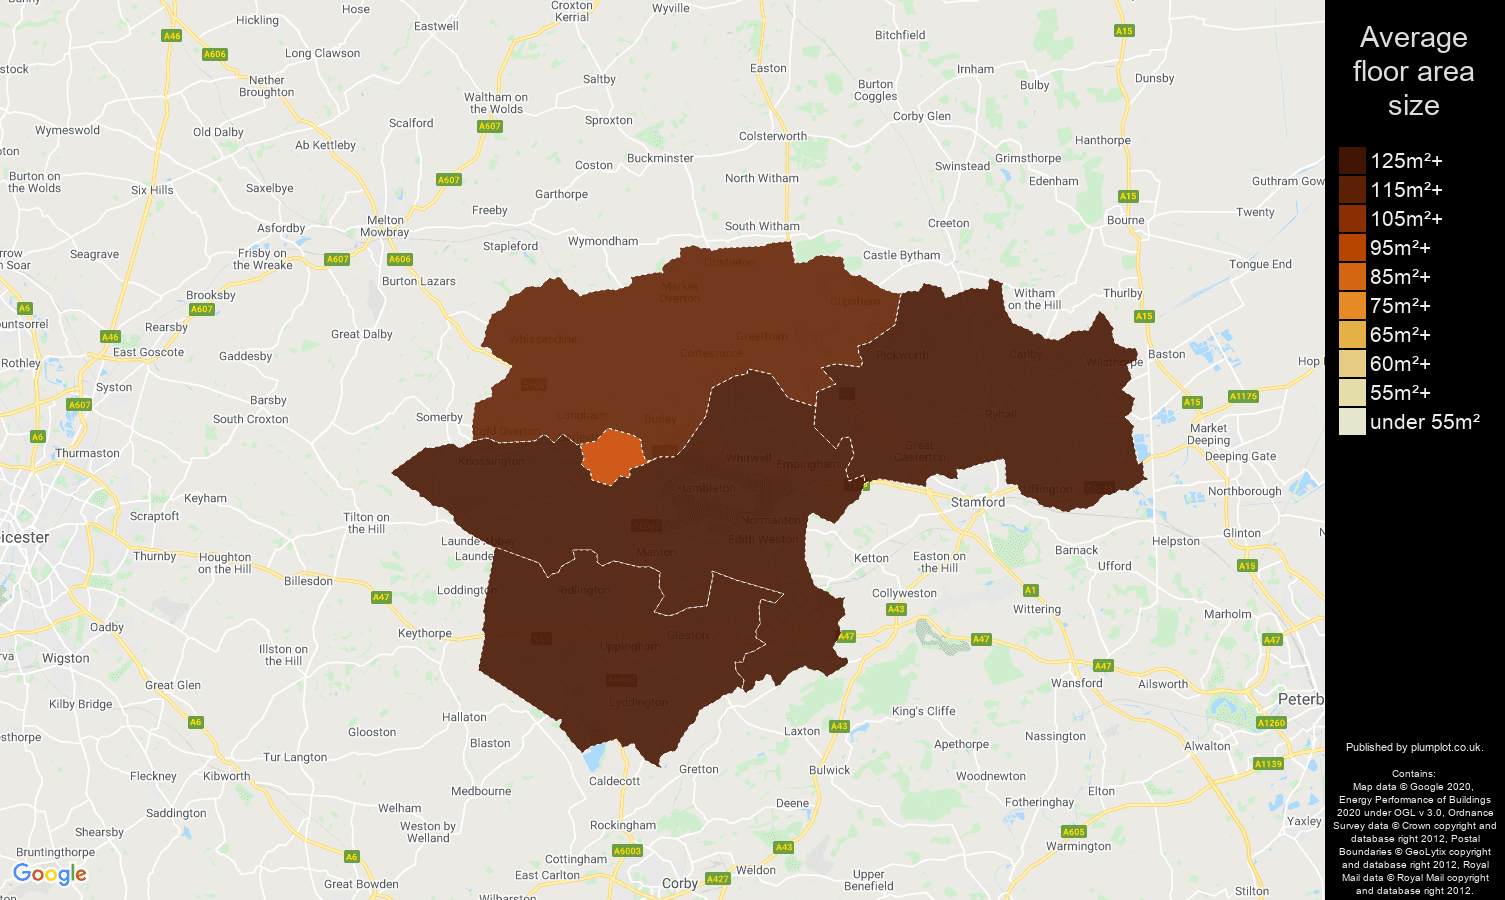 Rutland map of average floor area size of houses